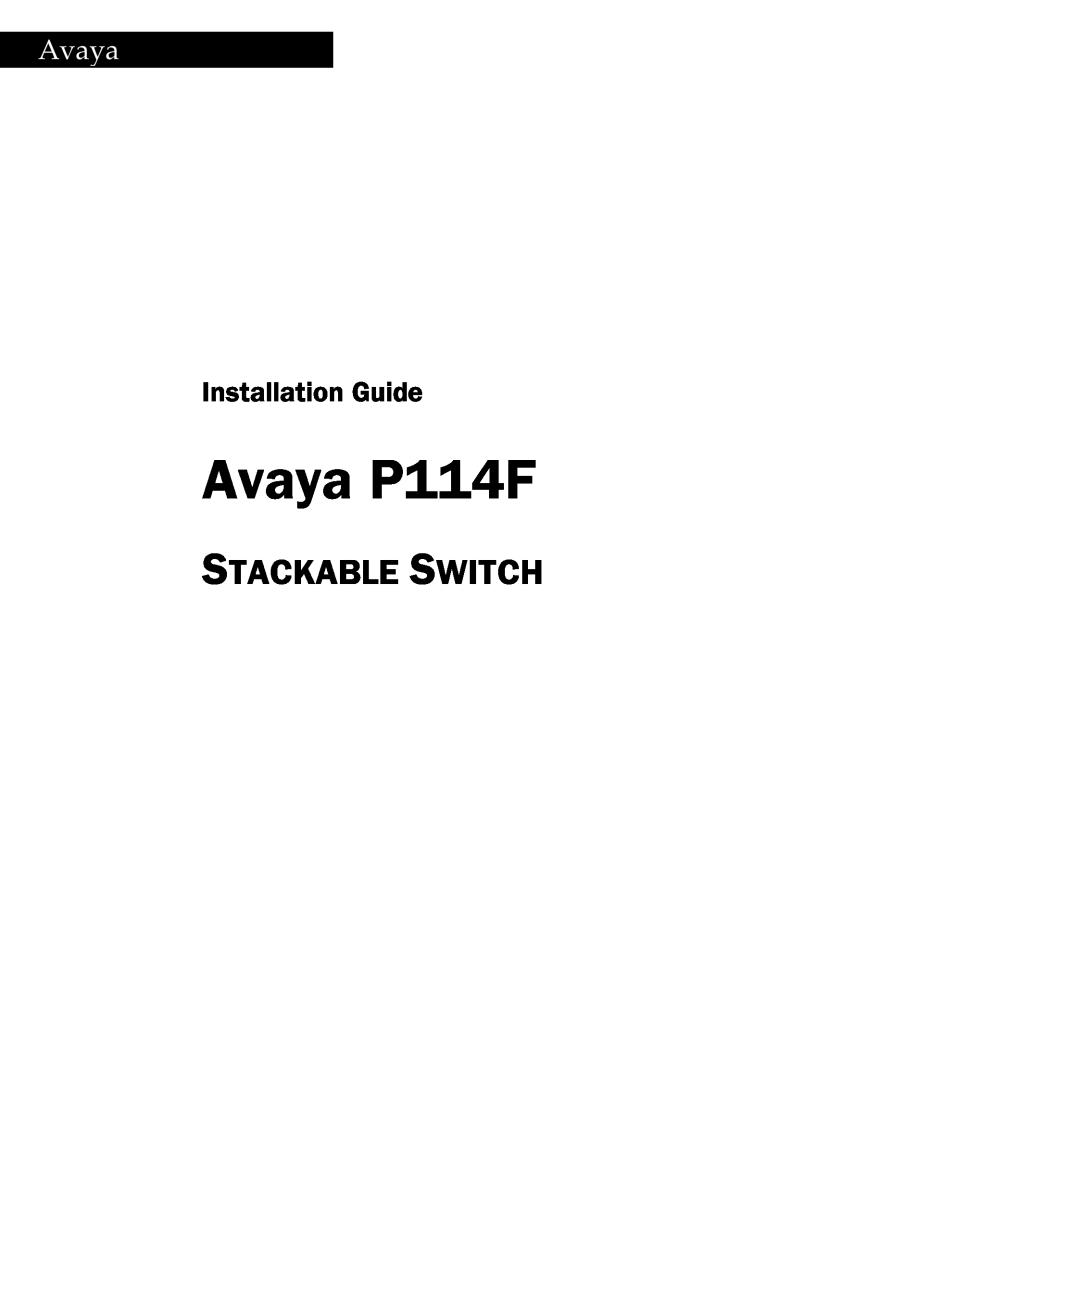 Canon manual Avaya P114F, Stackable Switch, Installation Guide 